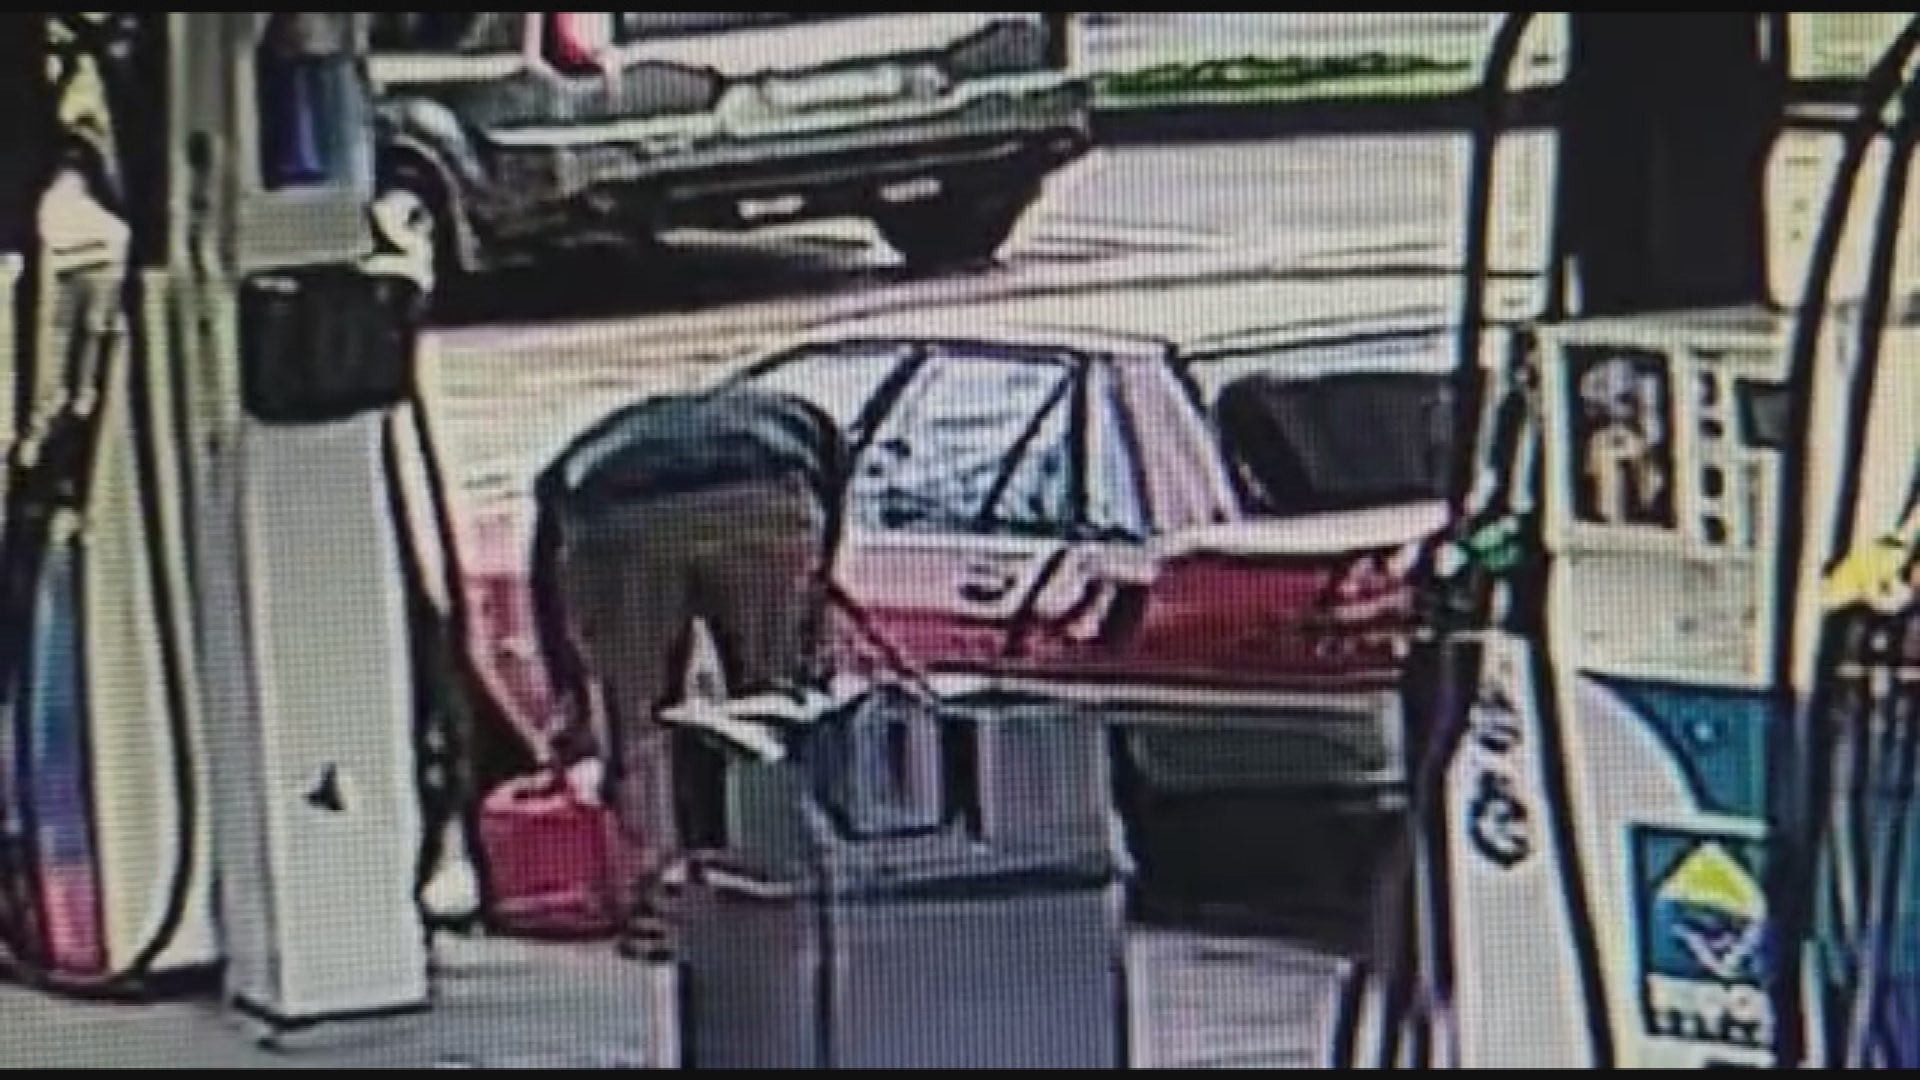 Thieves targeting Sydney petrol stations, CCTV shows thieves driving off without paying.